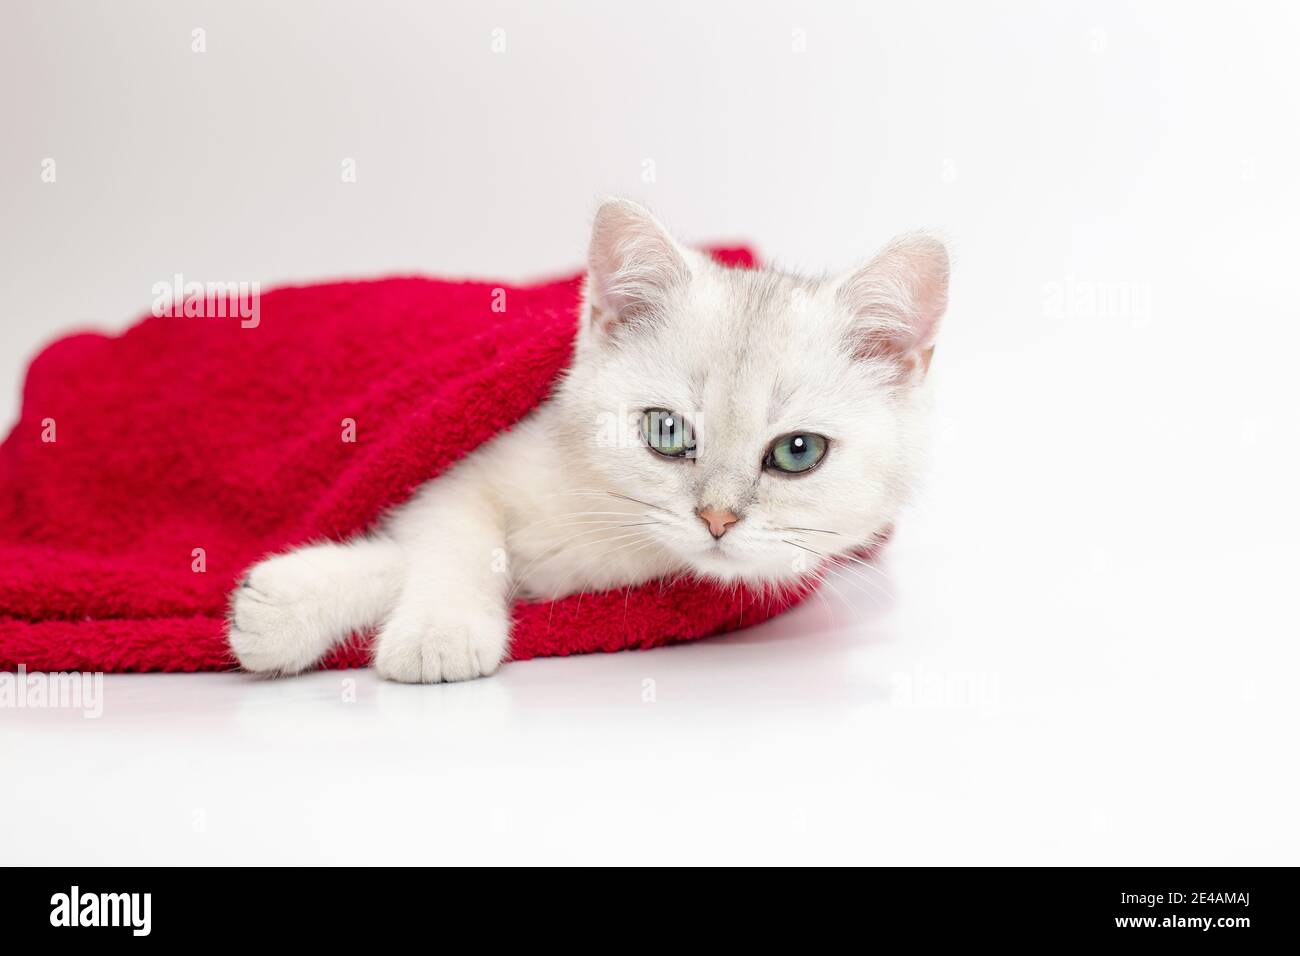 One white kitten lies in a red towel on a white background Stock Photo